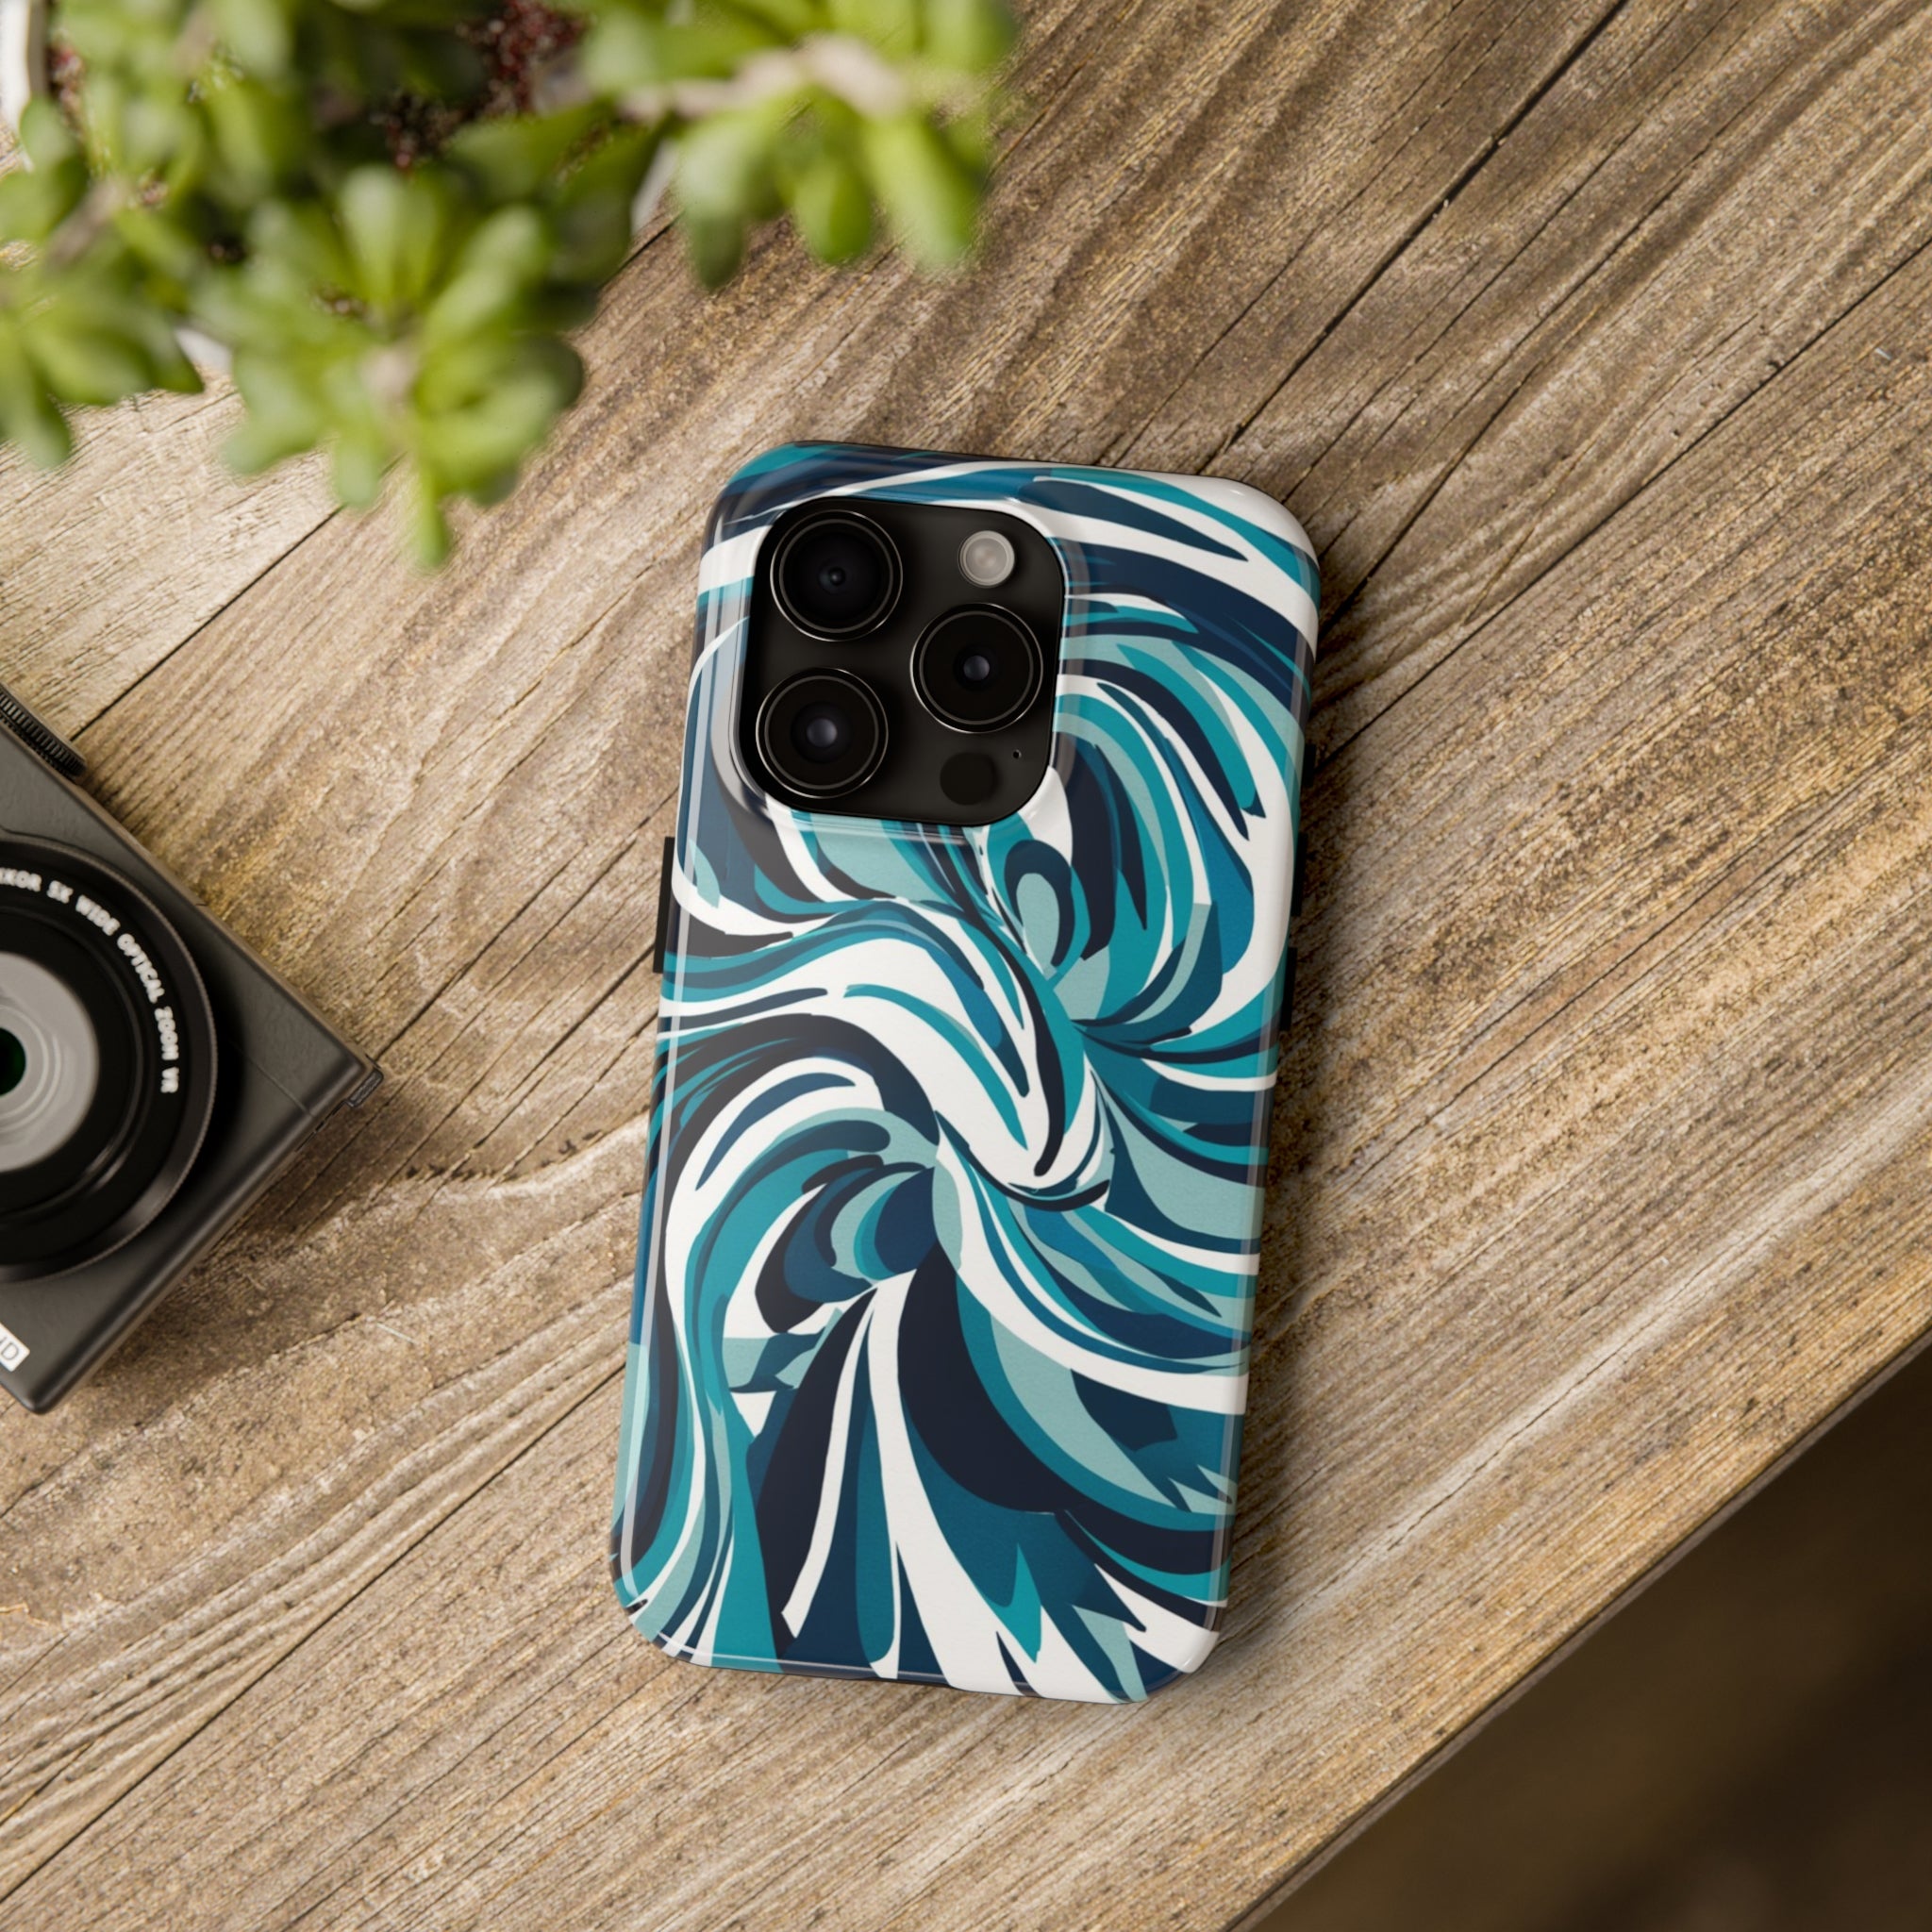 Churning Pacific Seas - Tough Phone Cases